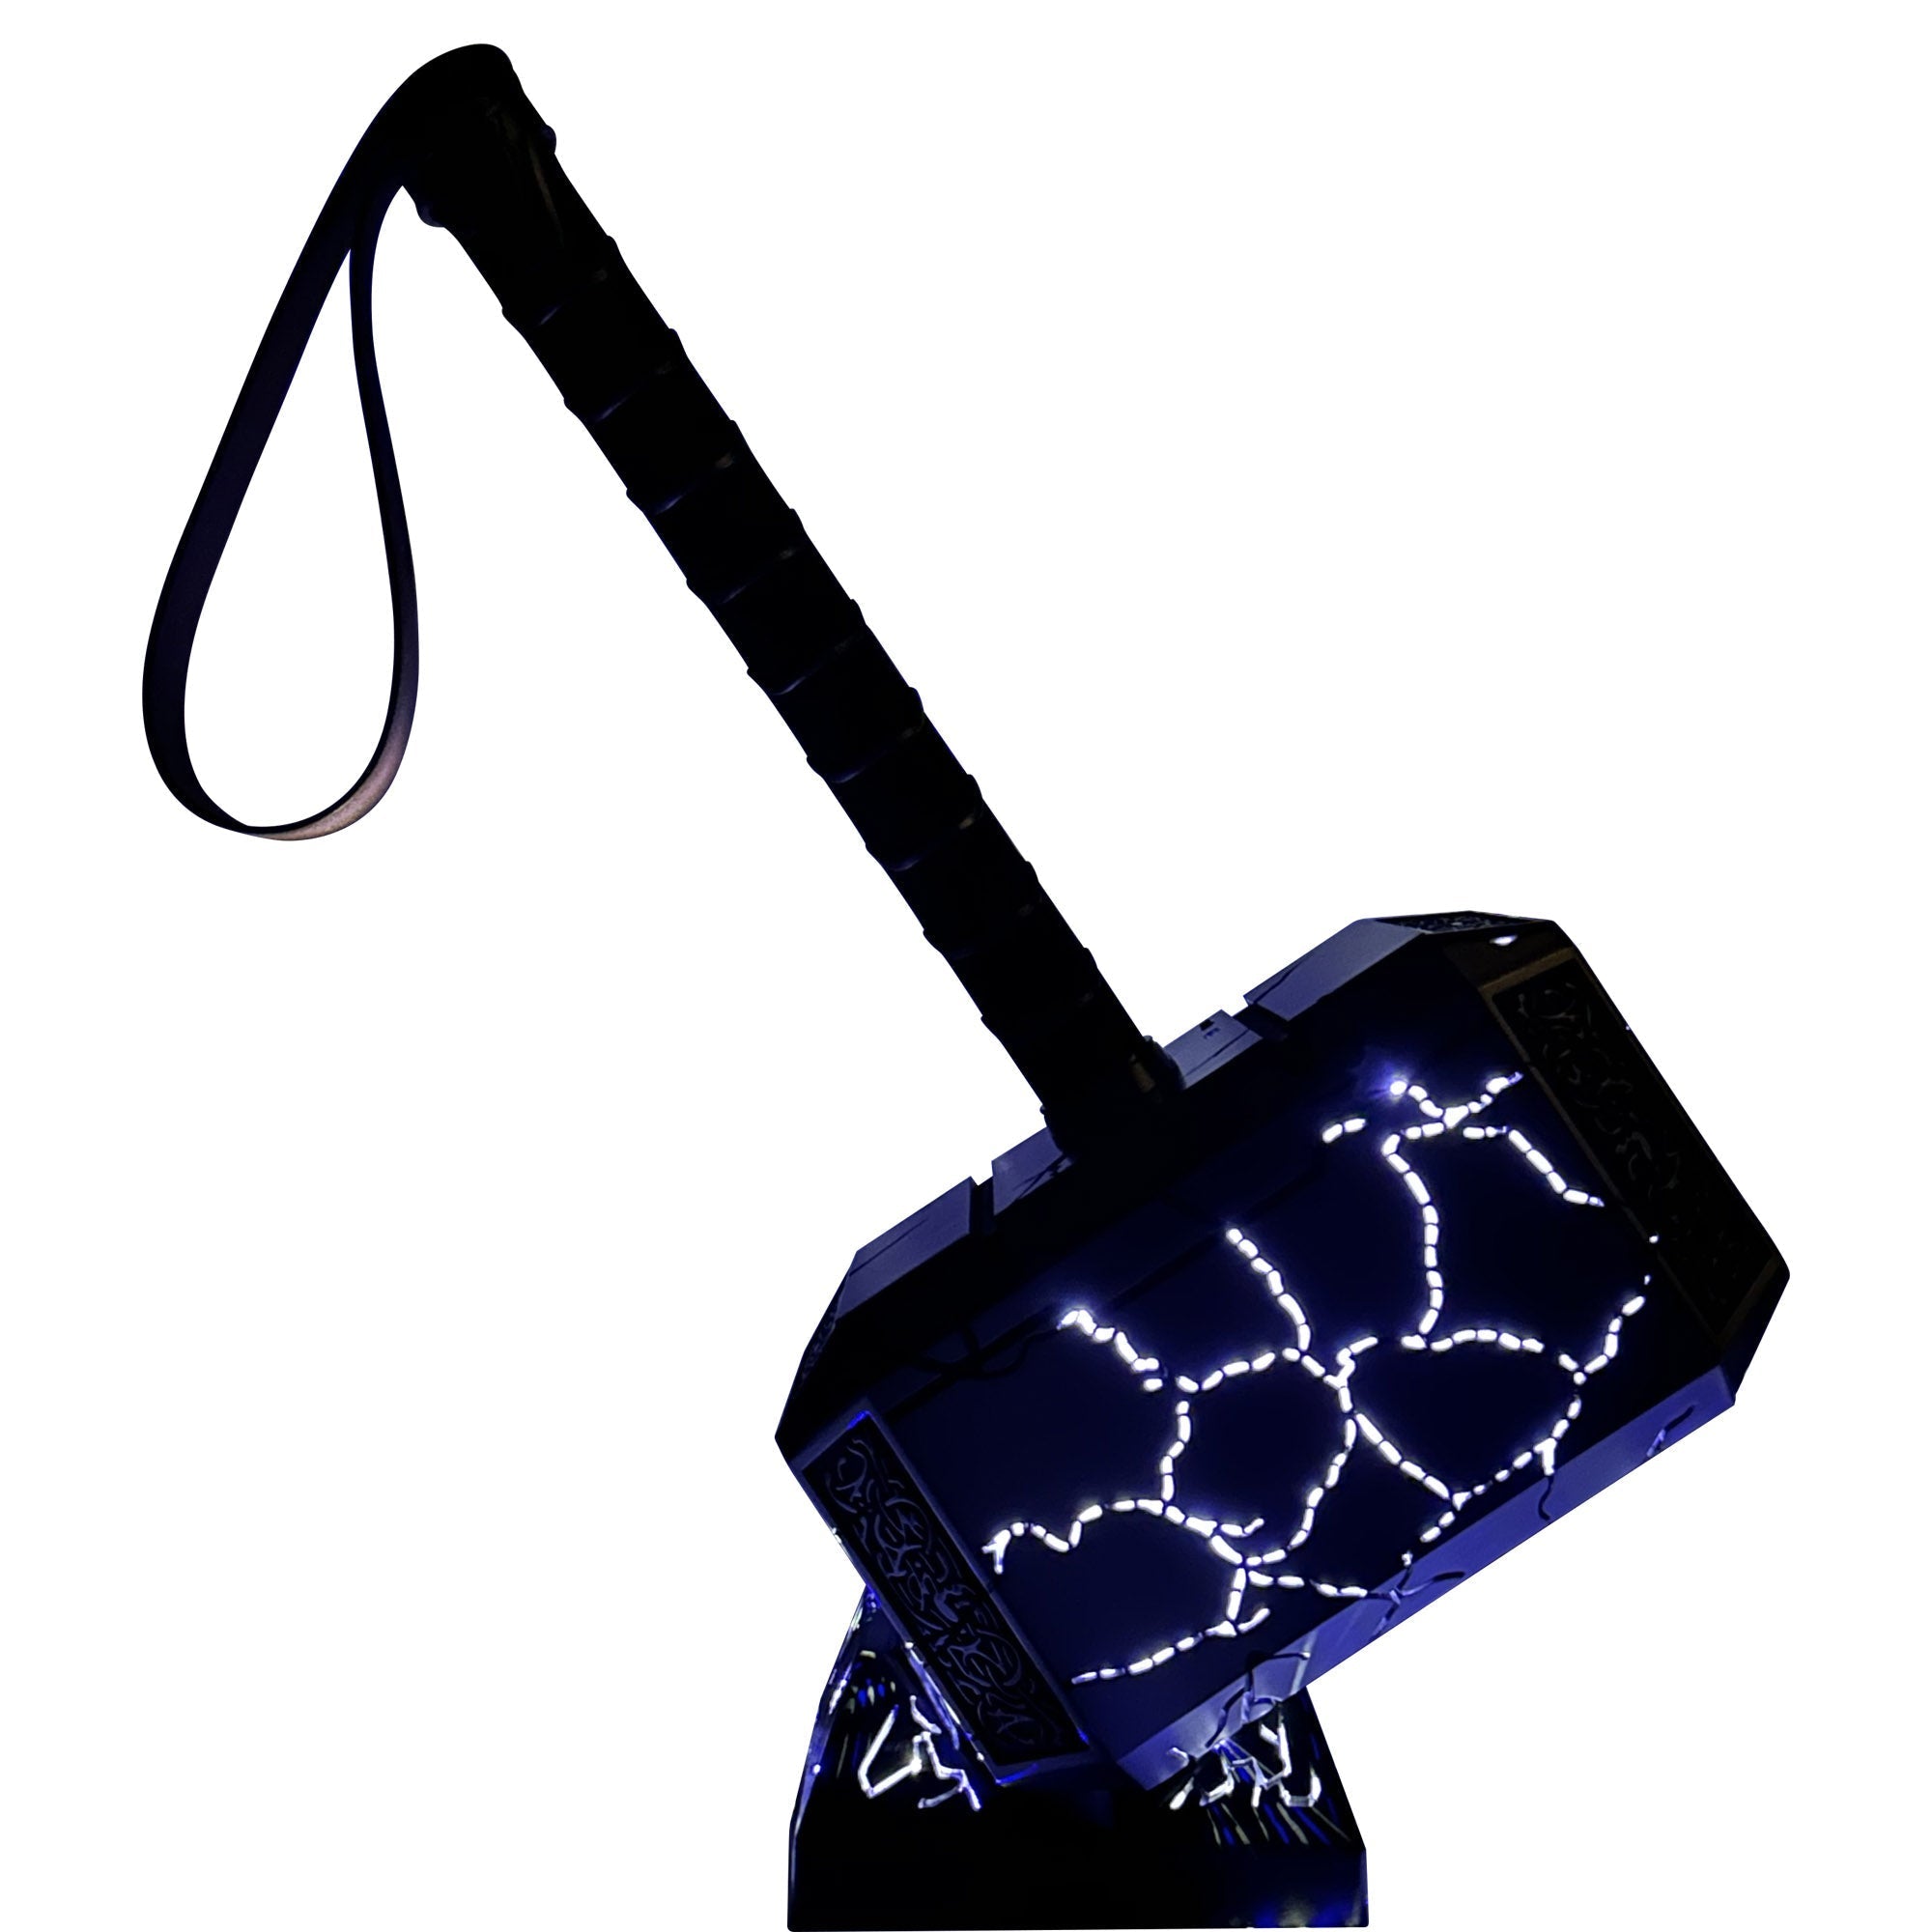 Summon the Thunder Lighted Thor Mjolnir Replica with Stand-4